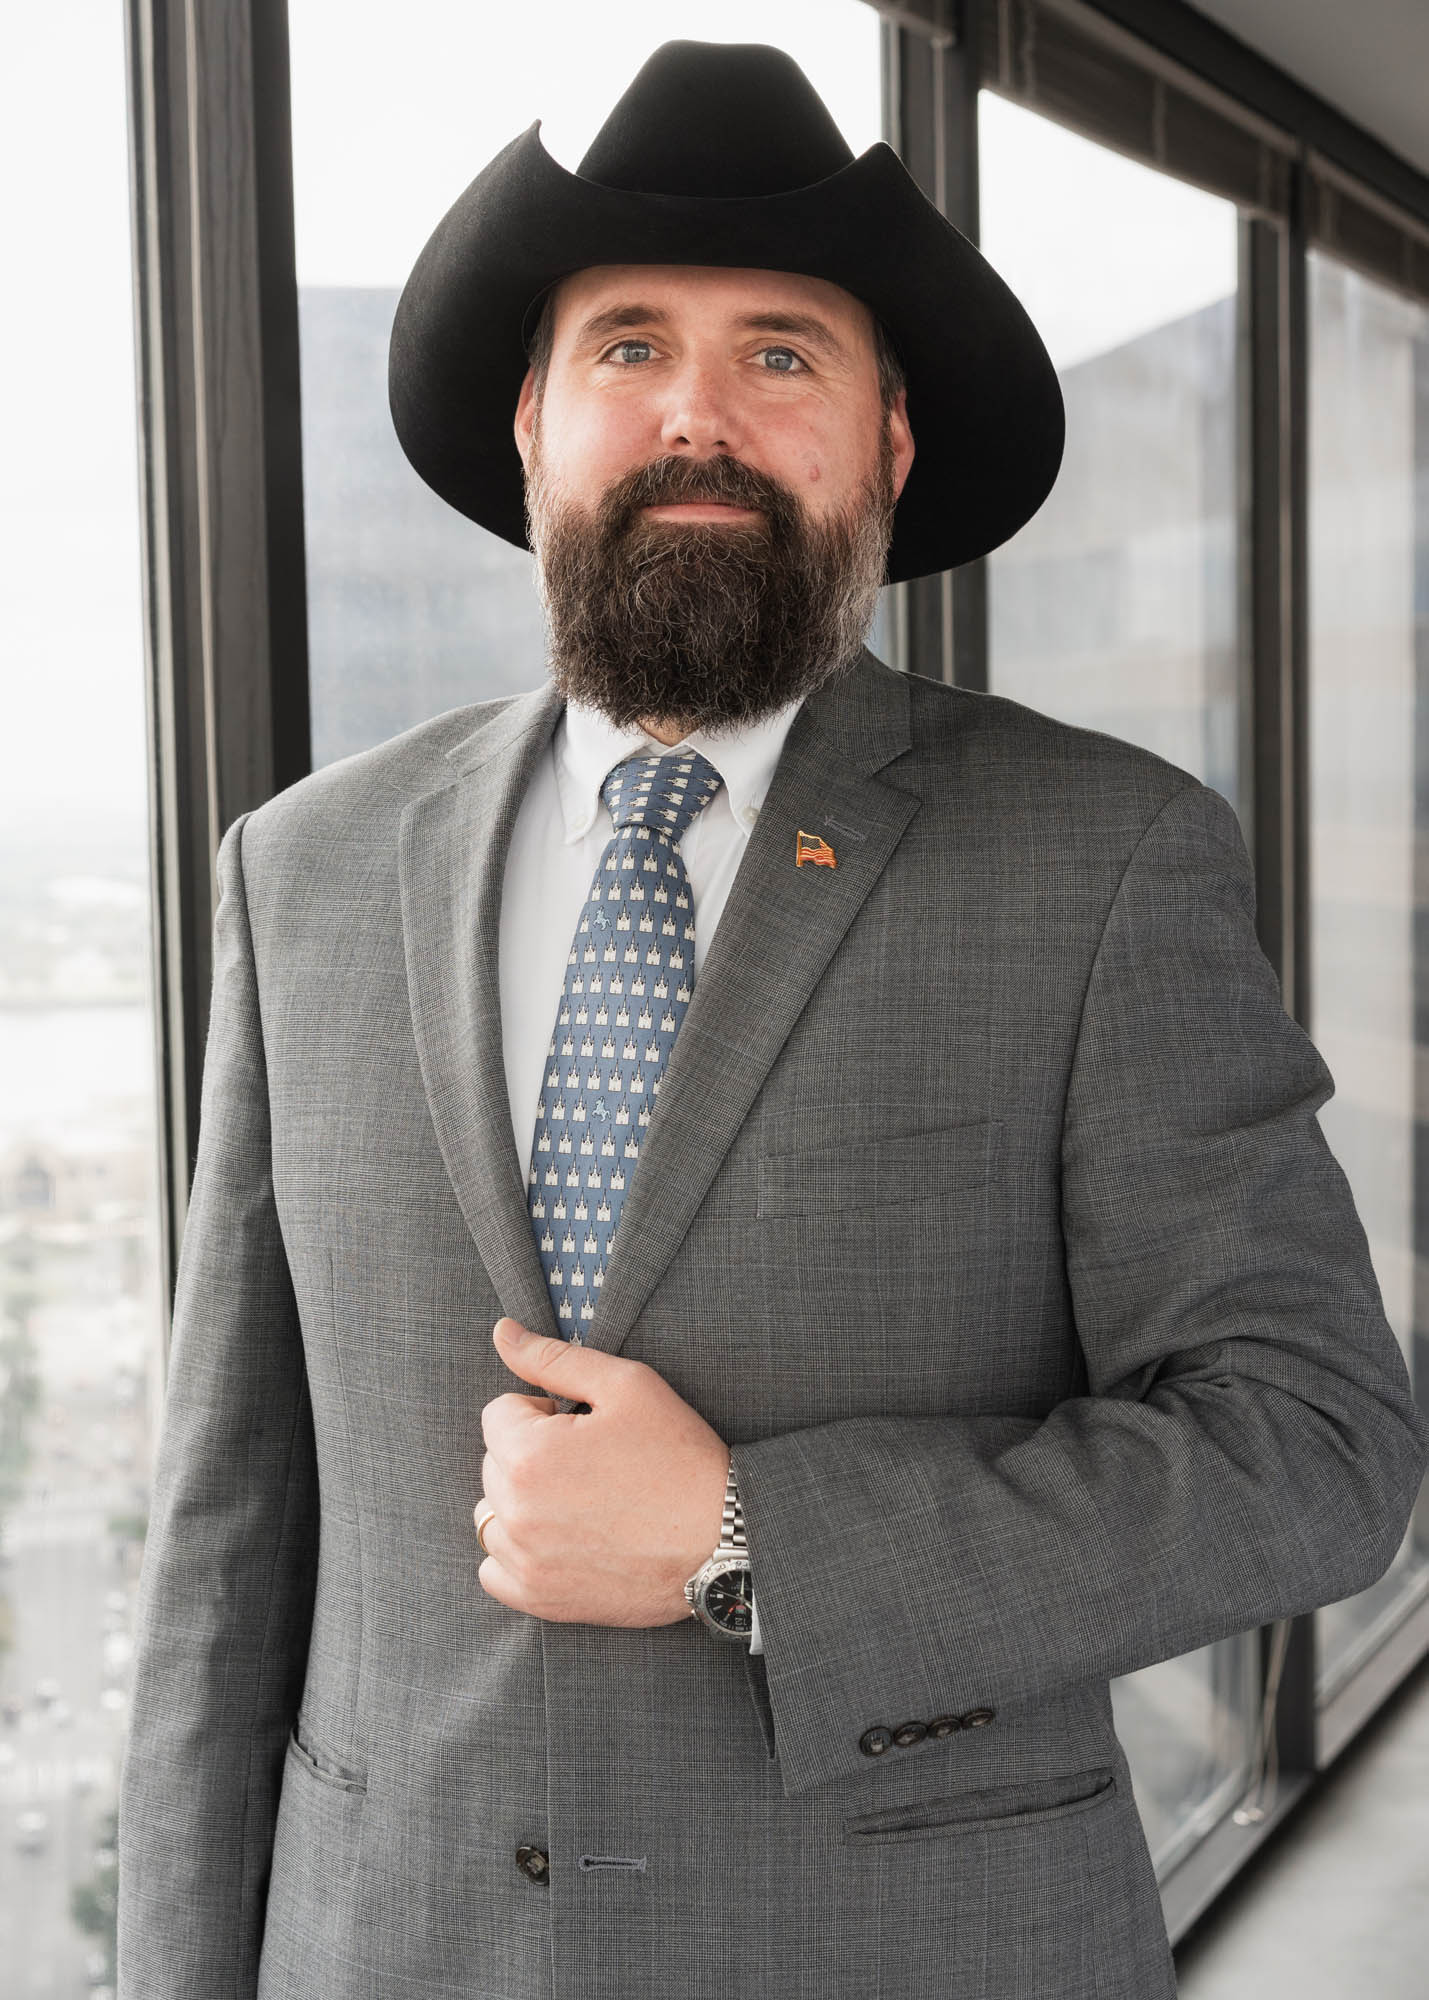 Attorney posing wearing a cowboy hat in his NOLA office